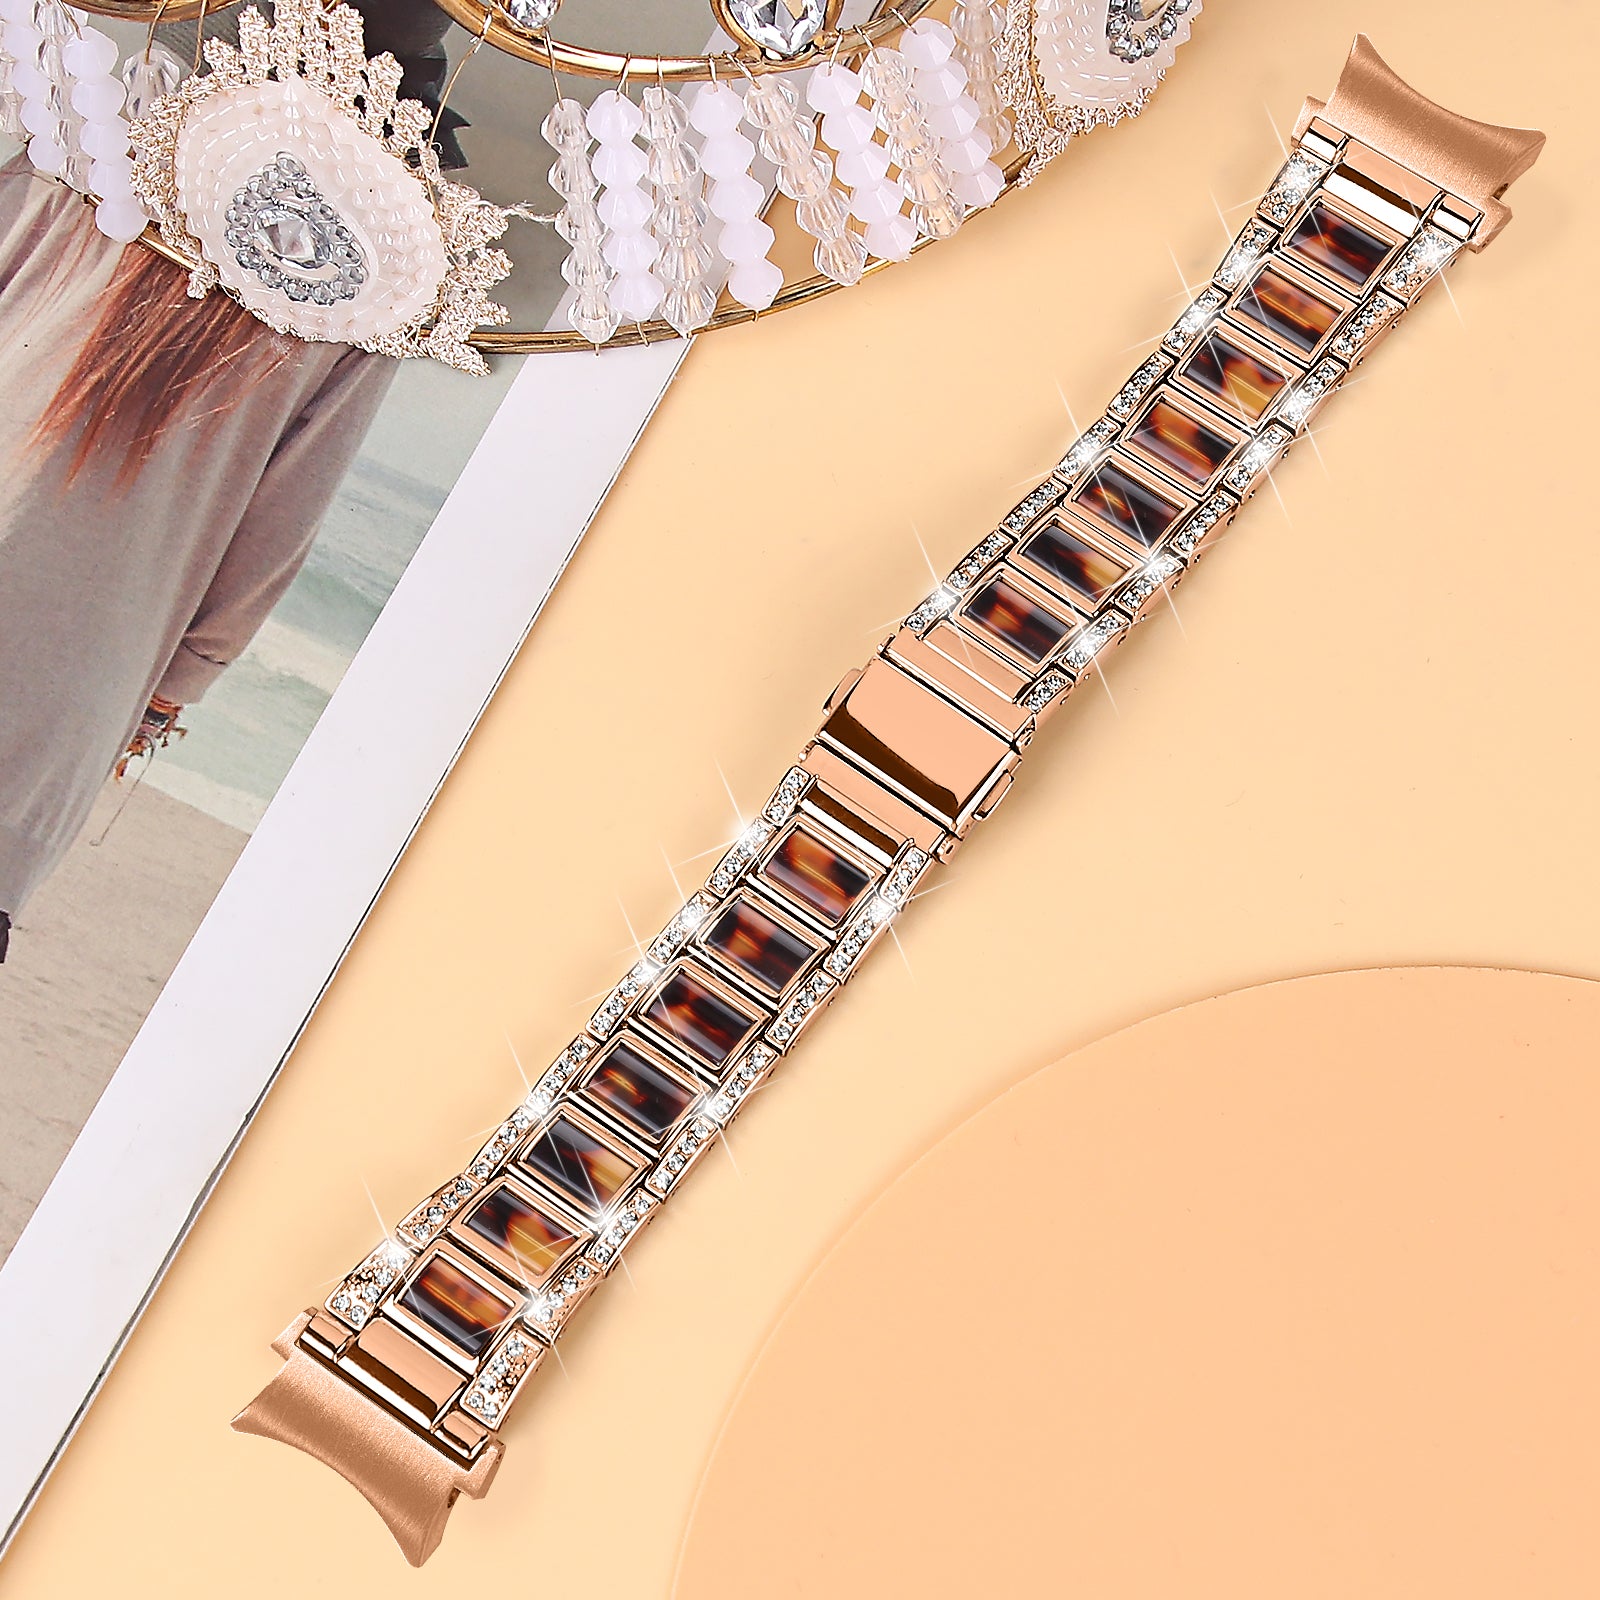 for Samsung Galaxy Watch4 Active 40mm/44mm/Watch4 Classic 42mm/46mm Rhinestone Decor Stainless Steel Resin Watch Band with Watch Strap Adapter - Rose Gold/Tortoiseshell Color